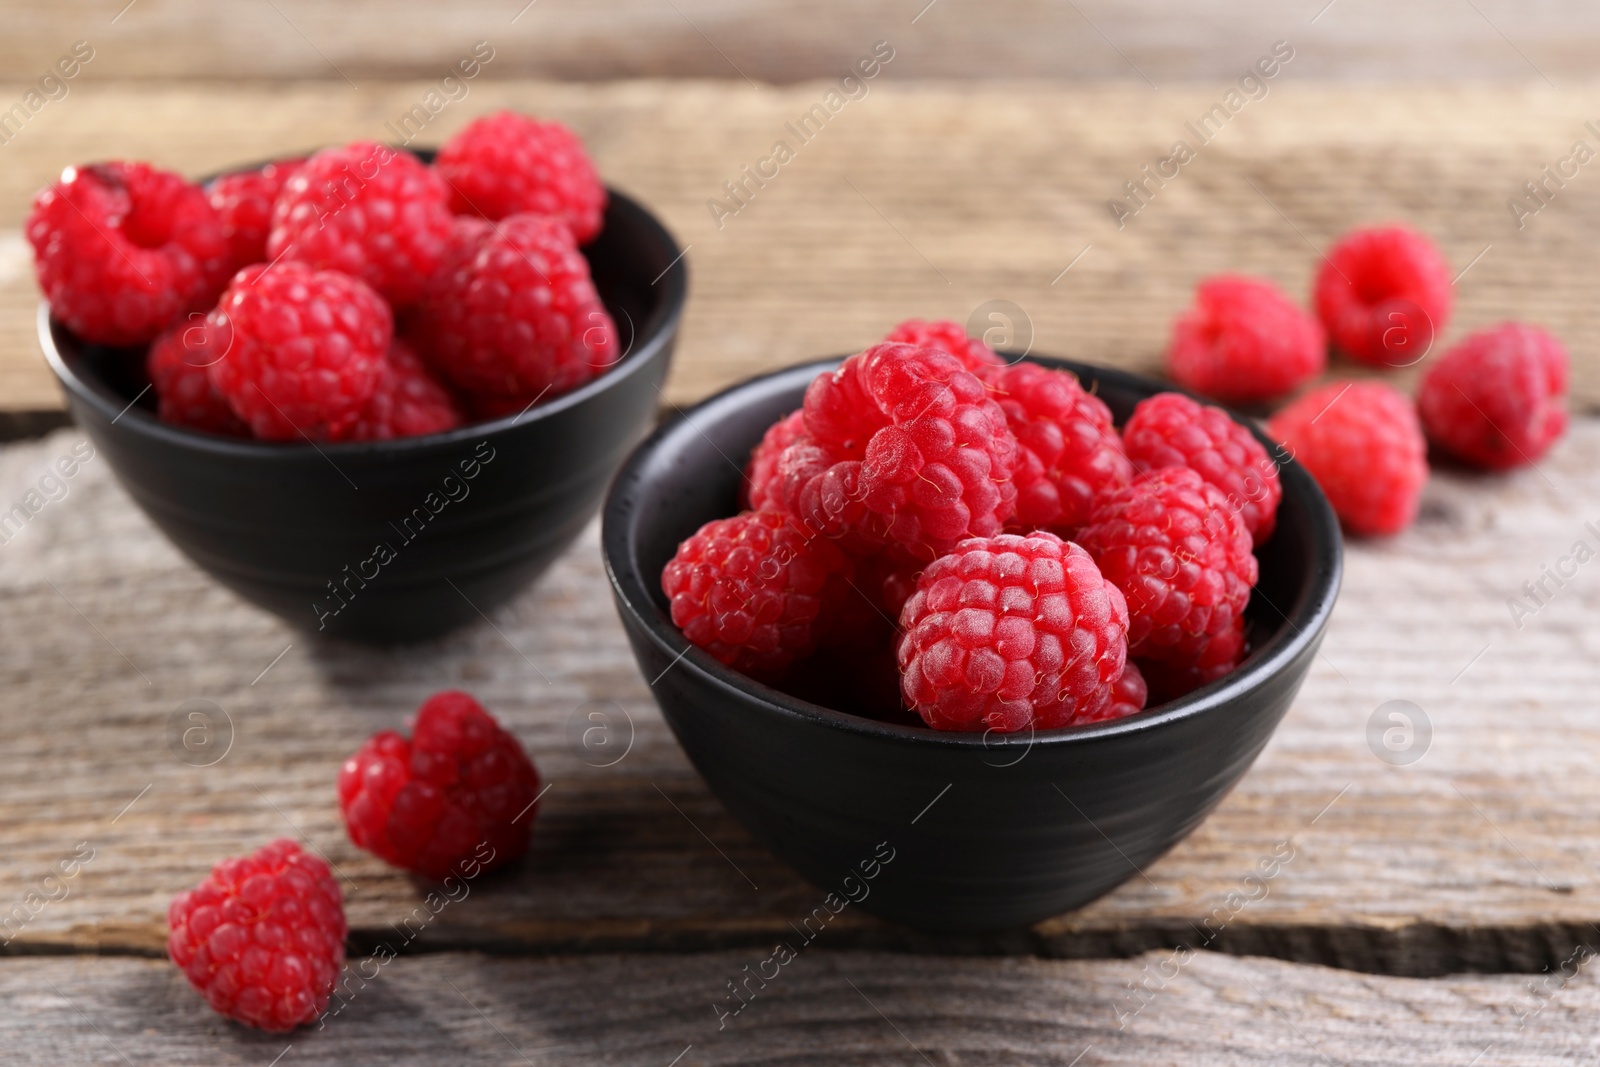 Photo of Tasty ripe raspberries in bowls on wooden table